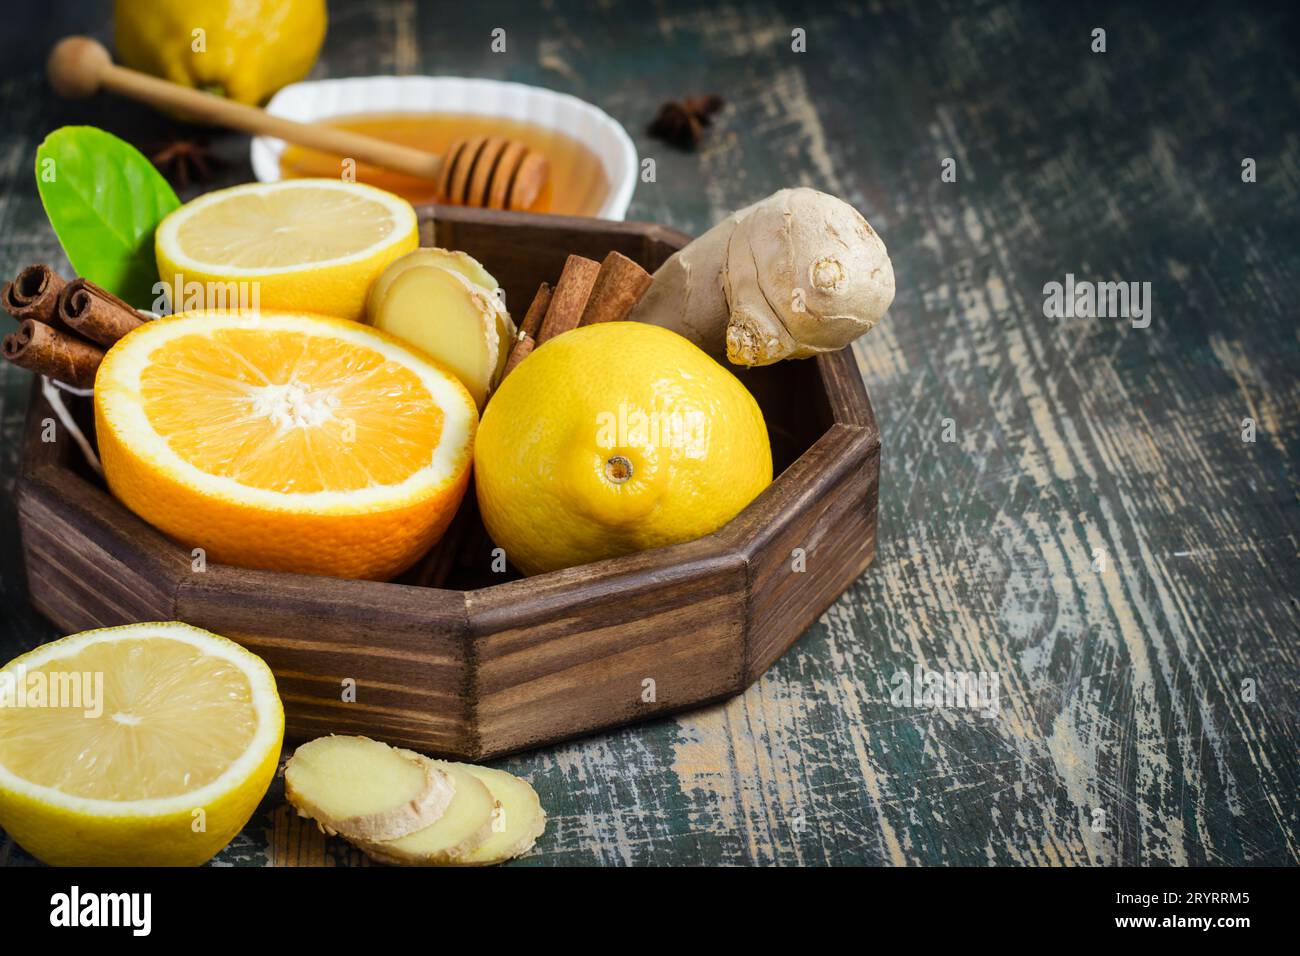 Tray with ingredients for making immunity boosting  healthy vitamin drink On dark background Stock Photo